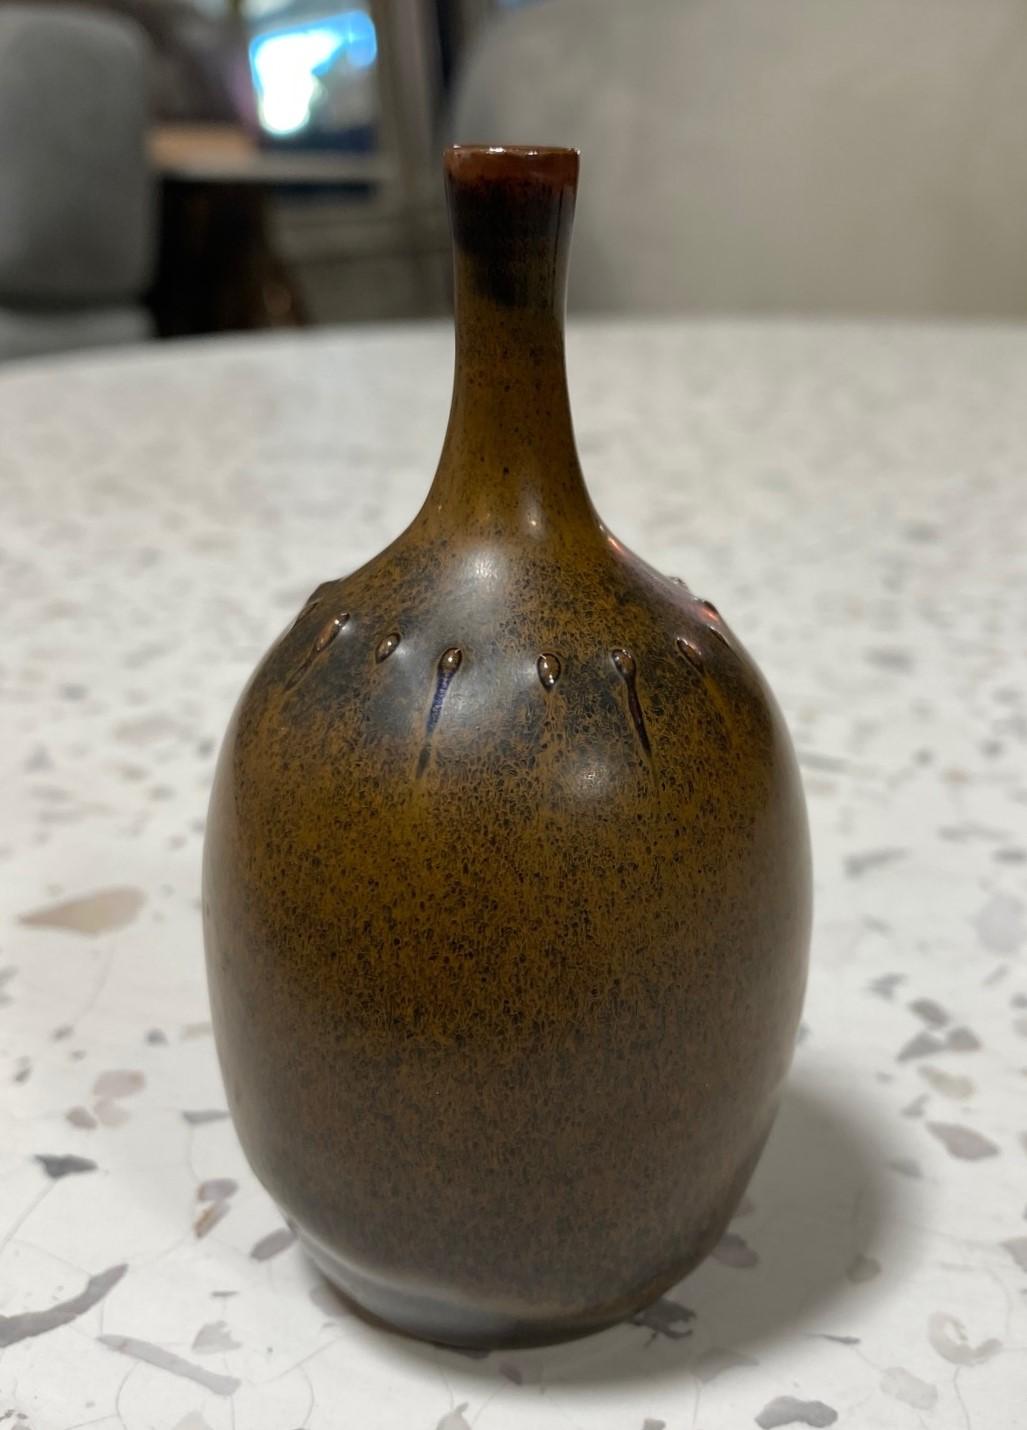 A beautiful and darkly glazed miniature vase by Swedish master ceramicist/designer Rolf Palm for Mölle, Sweden. This gem features a Classic shape with tiny spines and a rich glaze that radiates and changes colors (browns, greens, with a tinge of